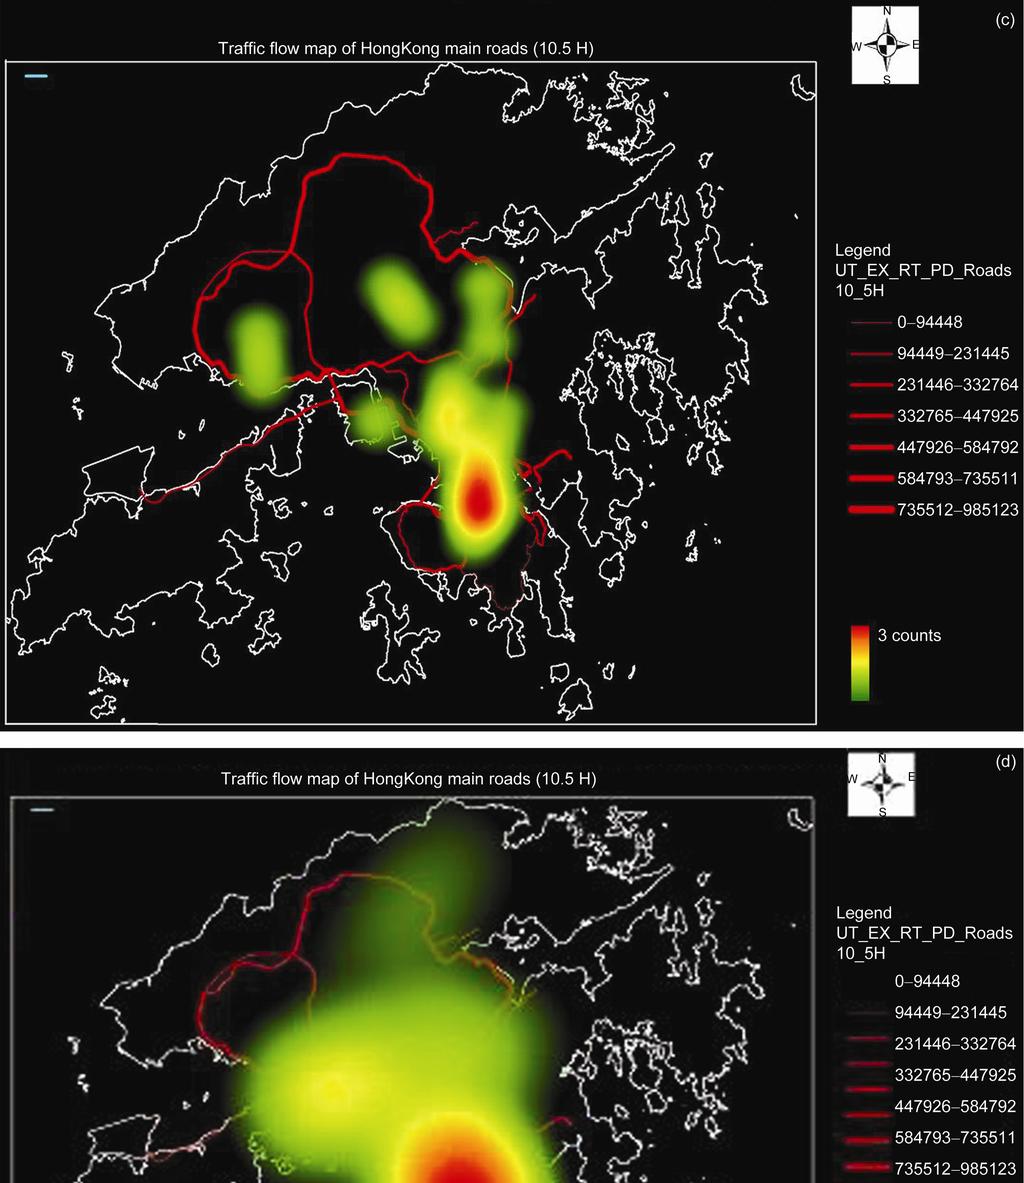 516 Dong W H, et al. Sci China Earth Sci March (2014) Vol.57 No.3 (Continued) Figure 1 Eye tracking data for the HongKong traffic flow map at 10:30 AM of the day.